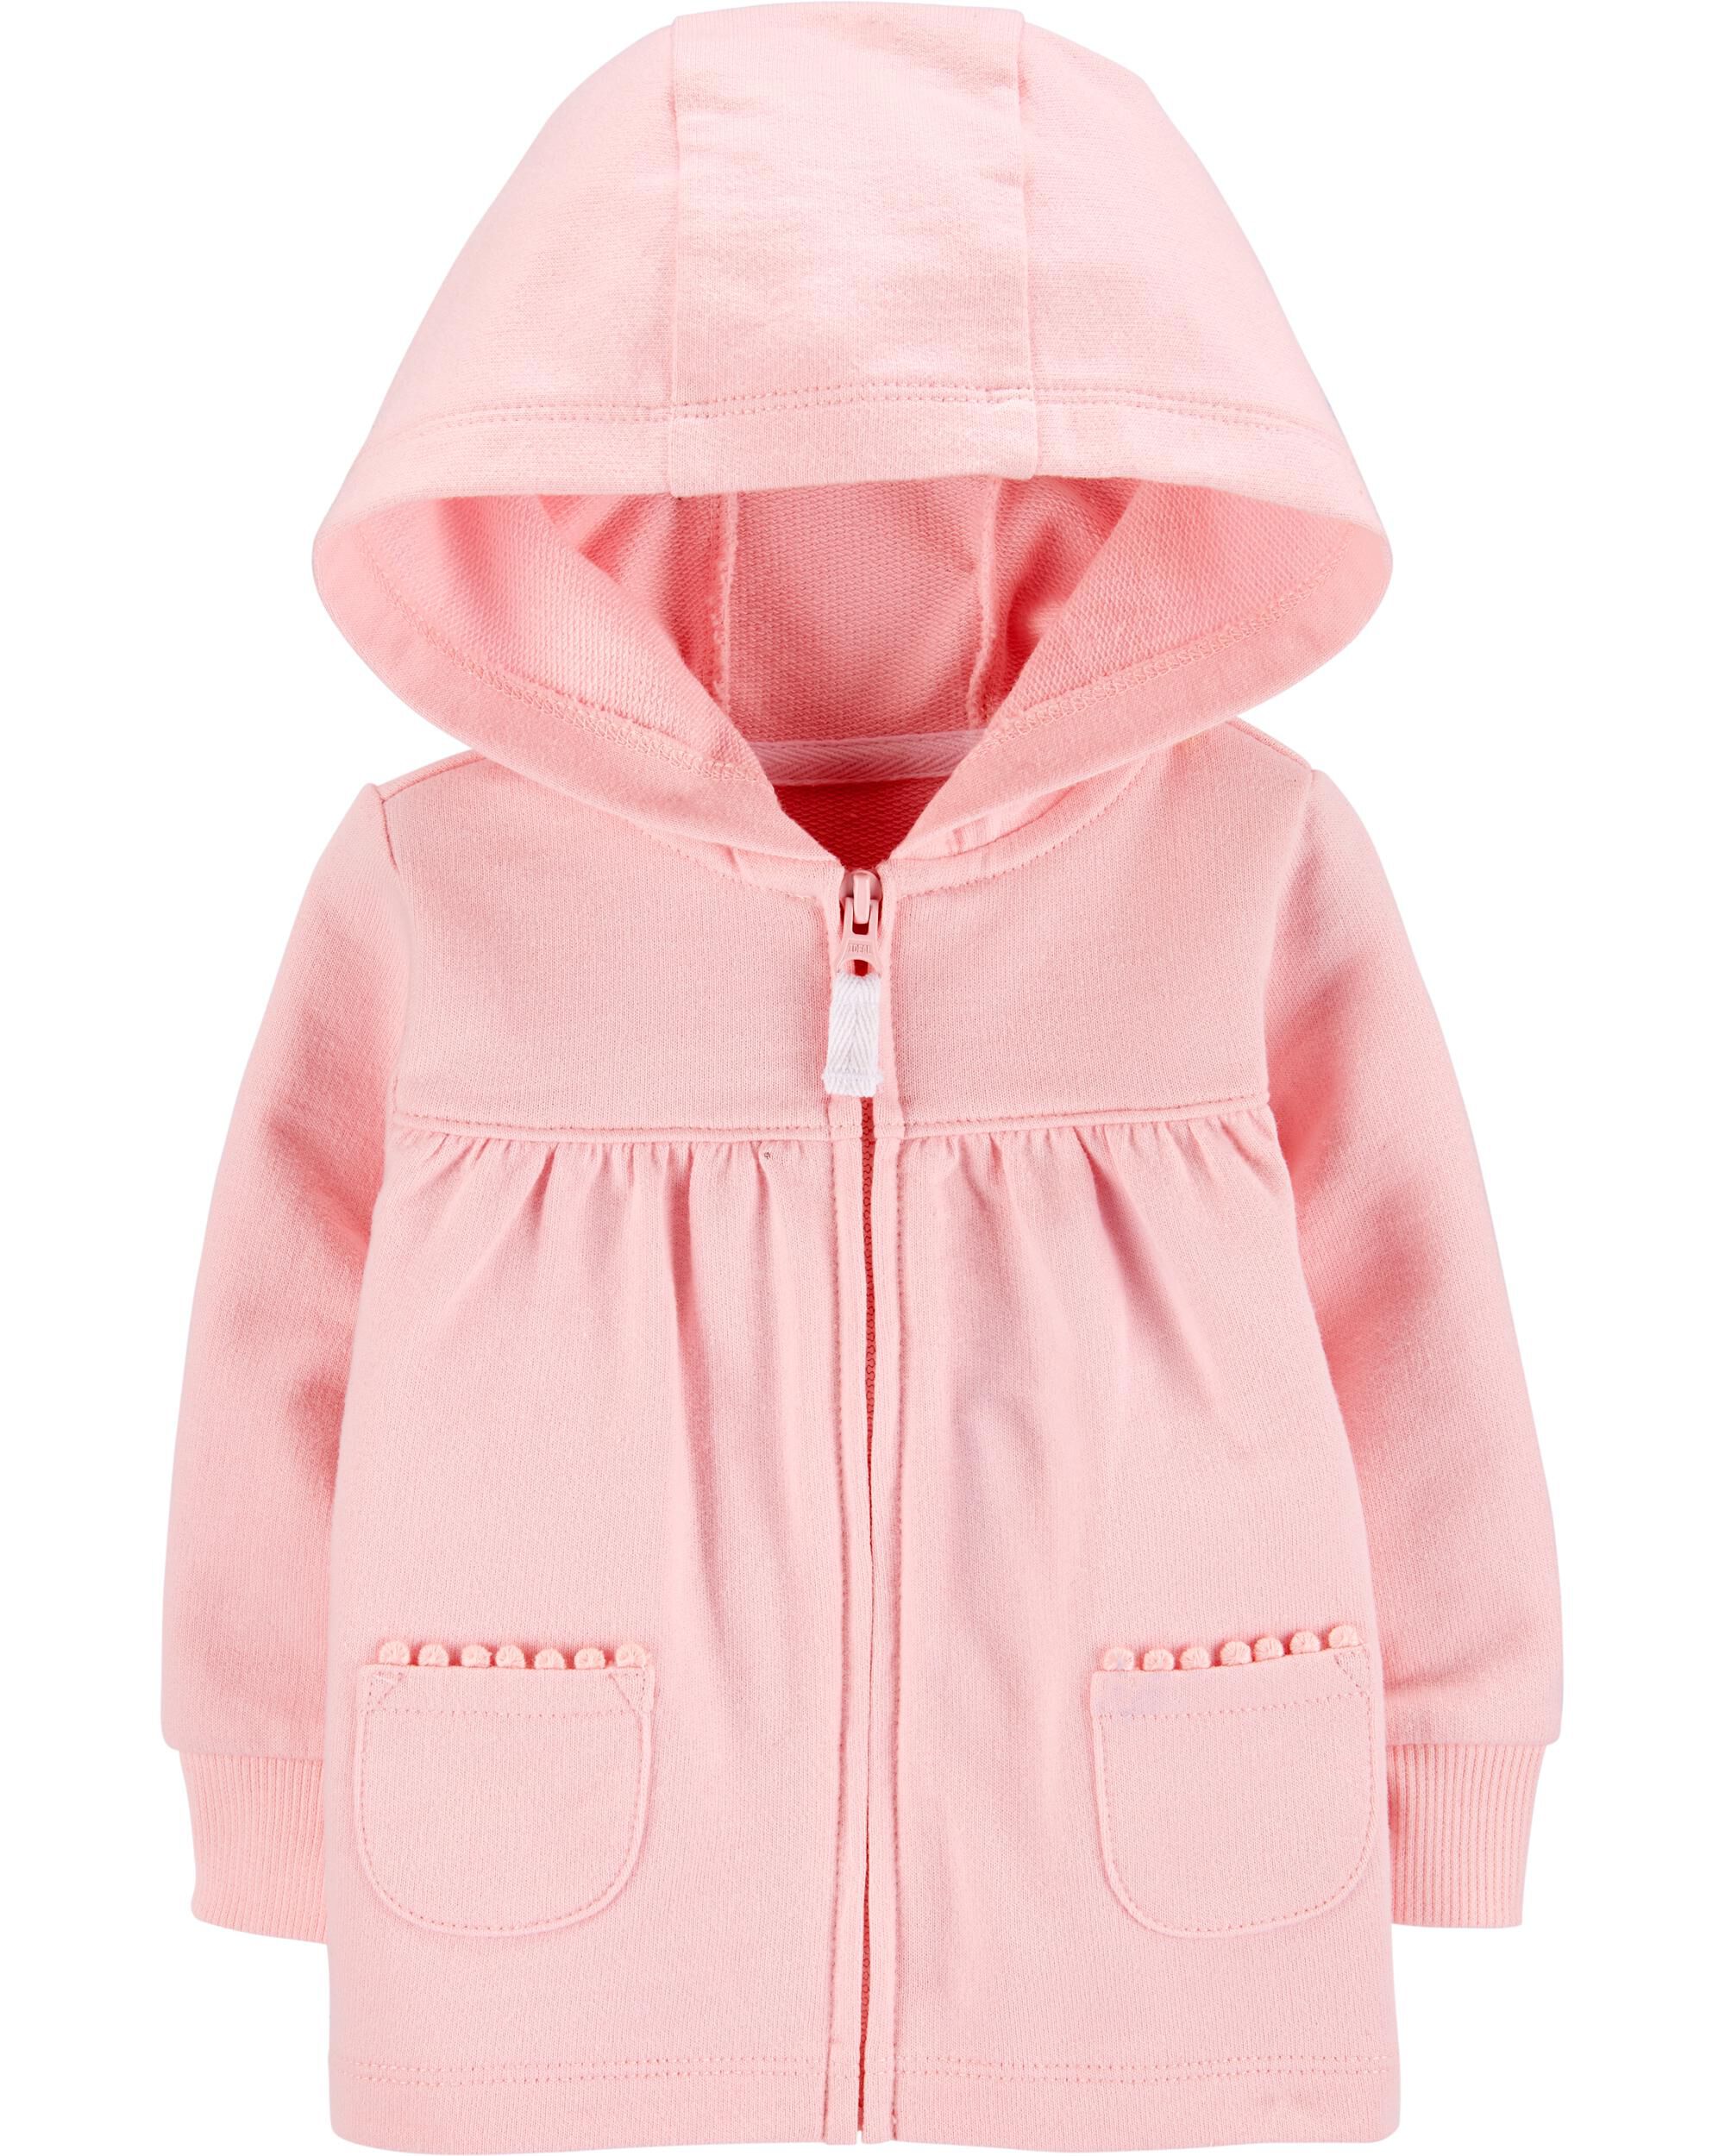  *CLEARANCE* Zip-Up French Terry Hoodie 